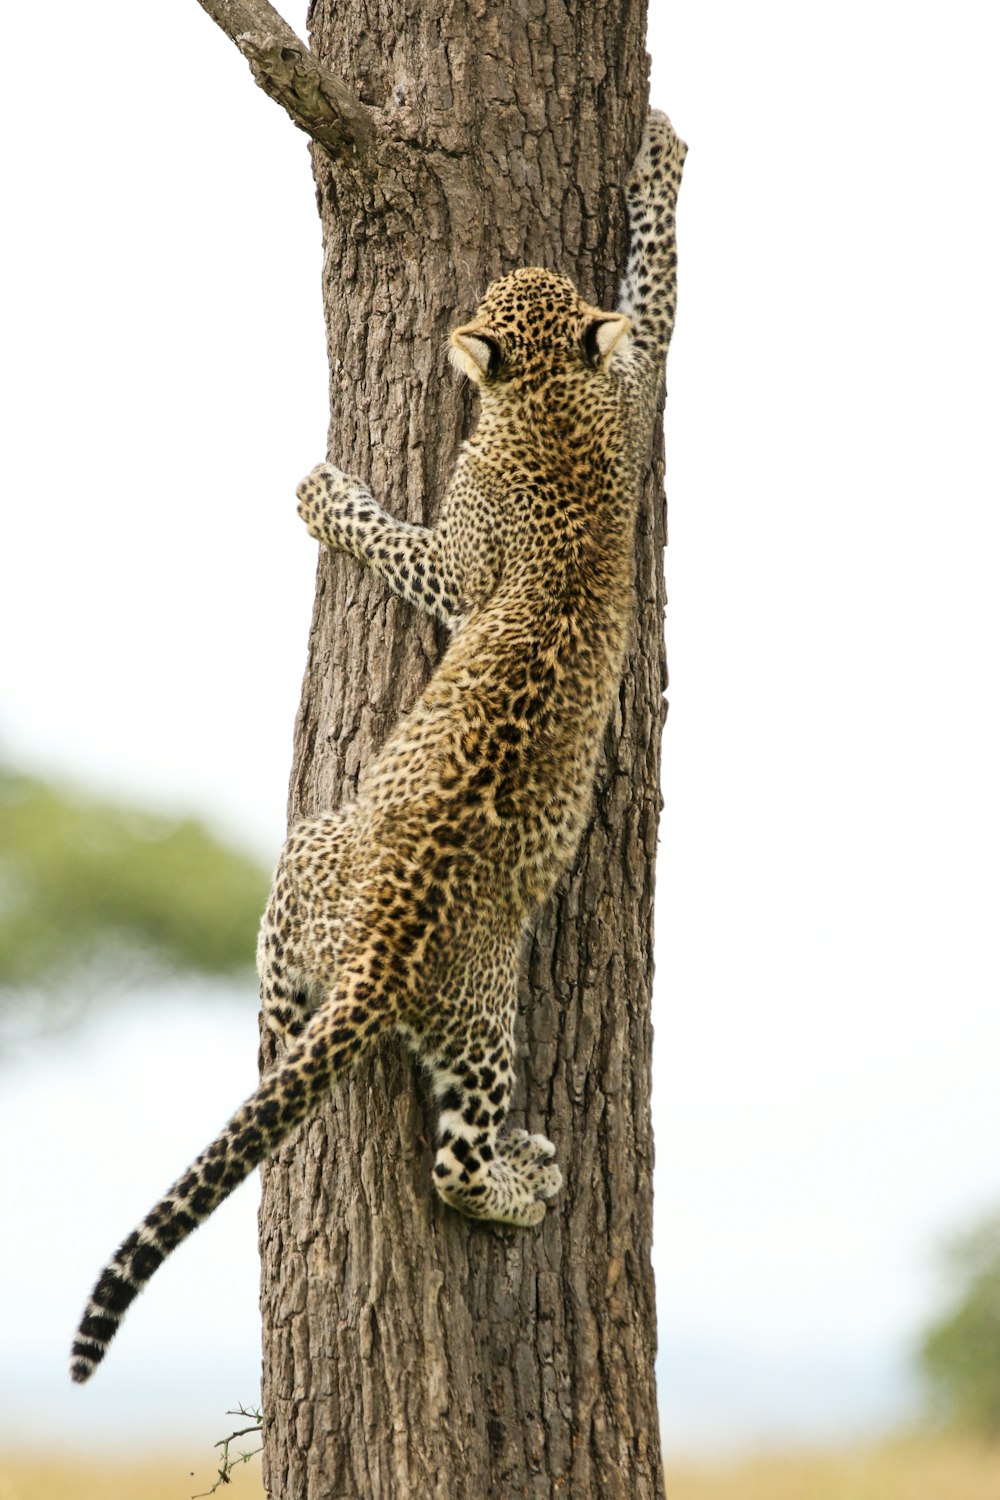 a leopard climbing up the side of a tree